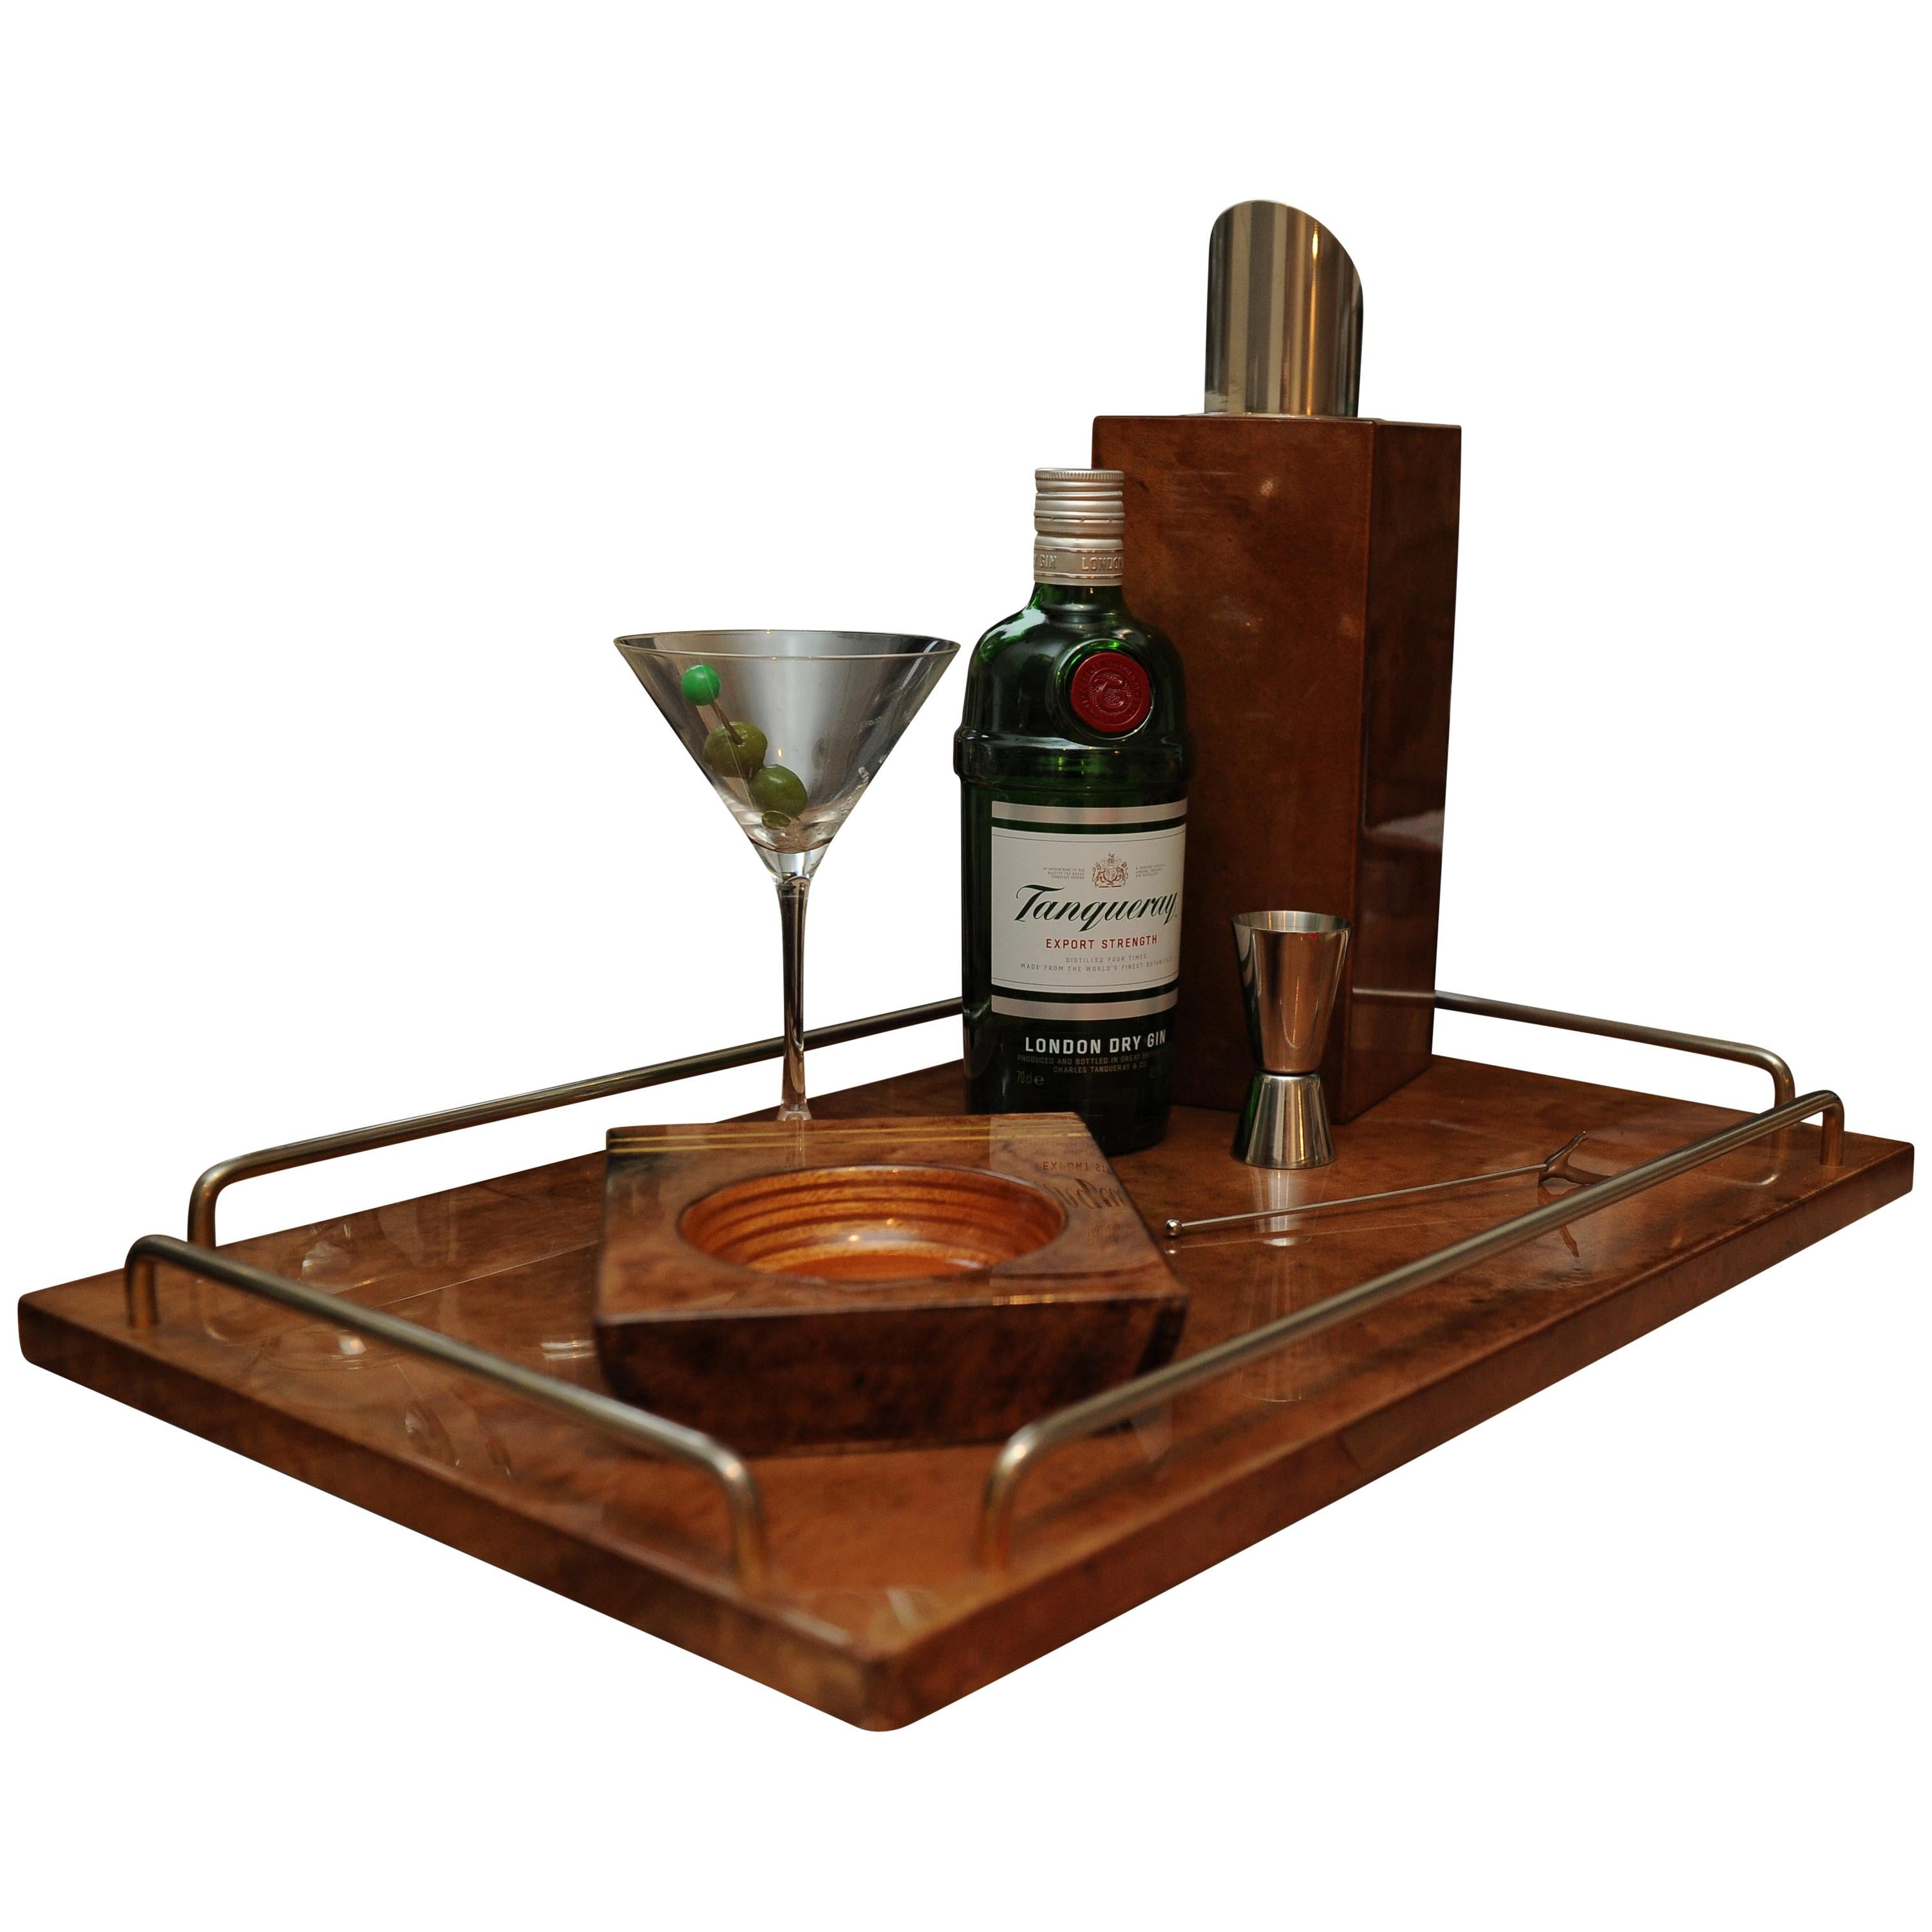 Aldo Tura impressive Art Deco set of barware accessories, with crisp Art Deco symmetry of varying heights akin to the skyscrapers of the Manhattan skyline.

The ultimate show stopping Art Deco set for entertaining at home or with